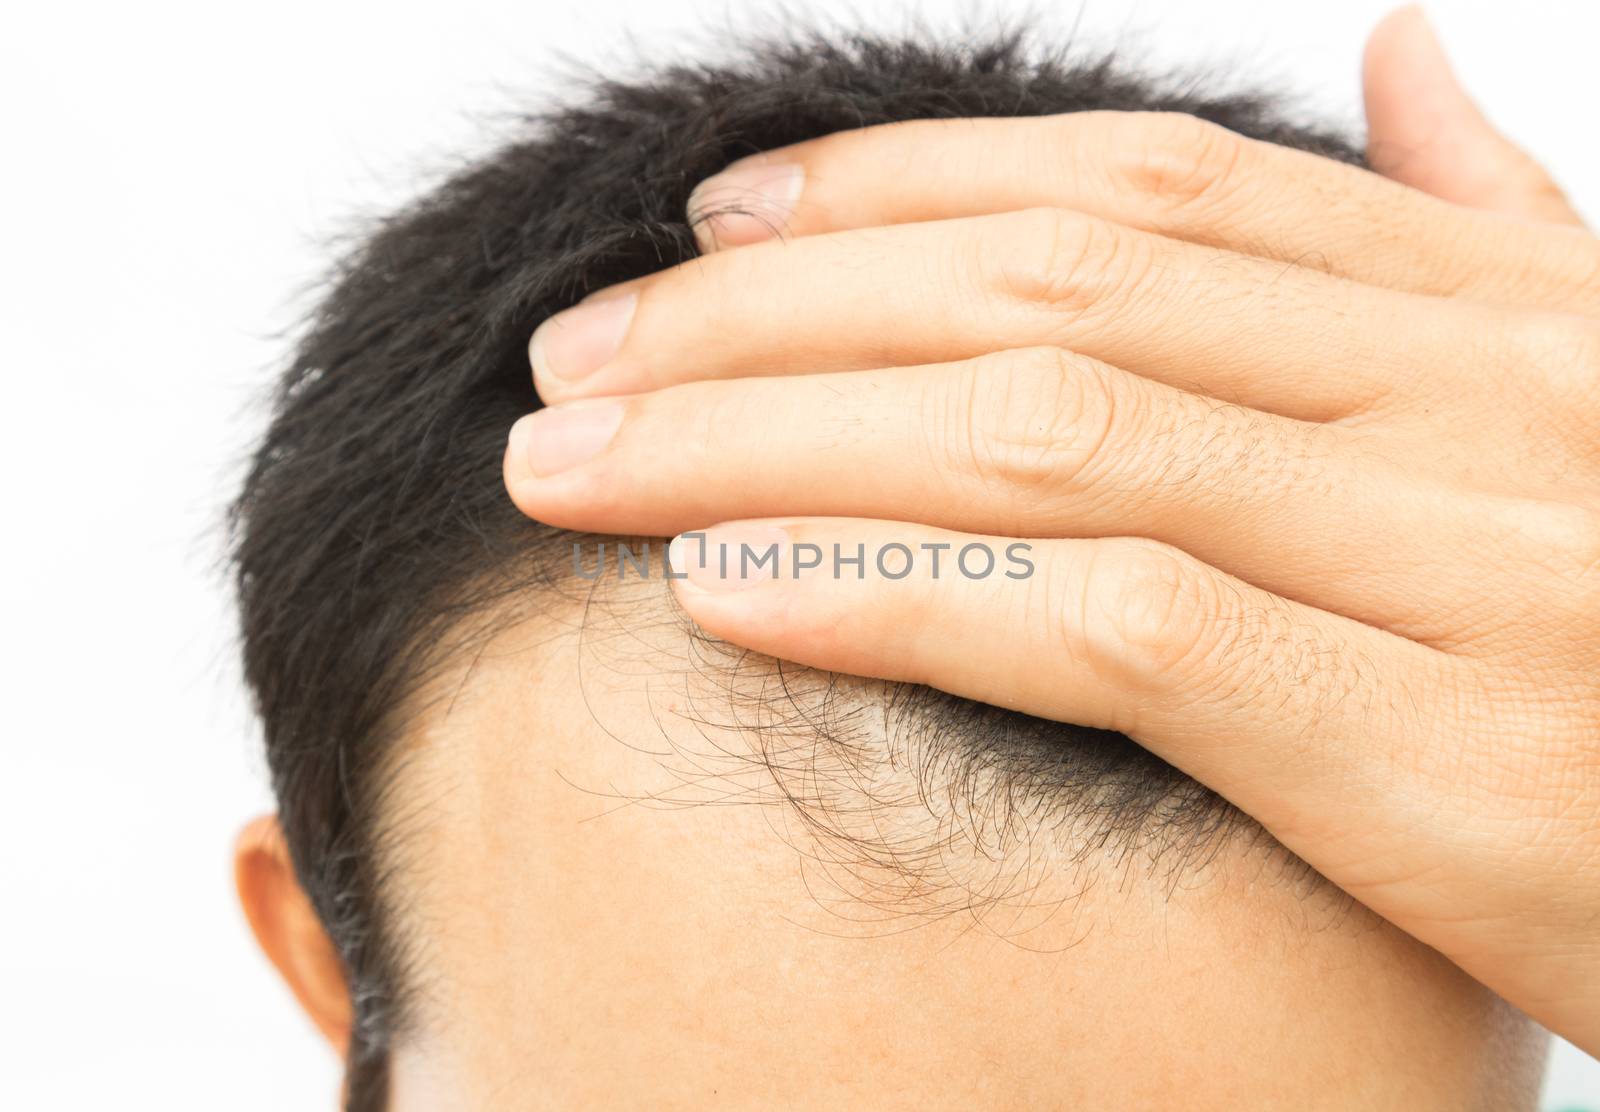 Young man serious hair loss problem for hair loss concept by pt.pongsak@gmail.com